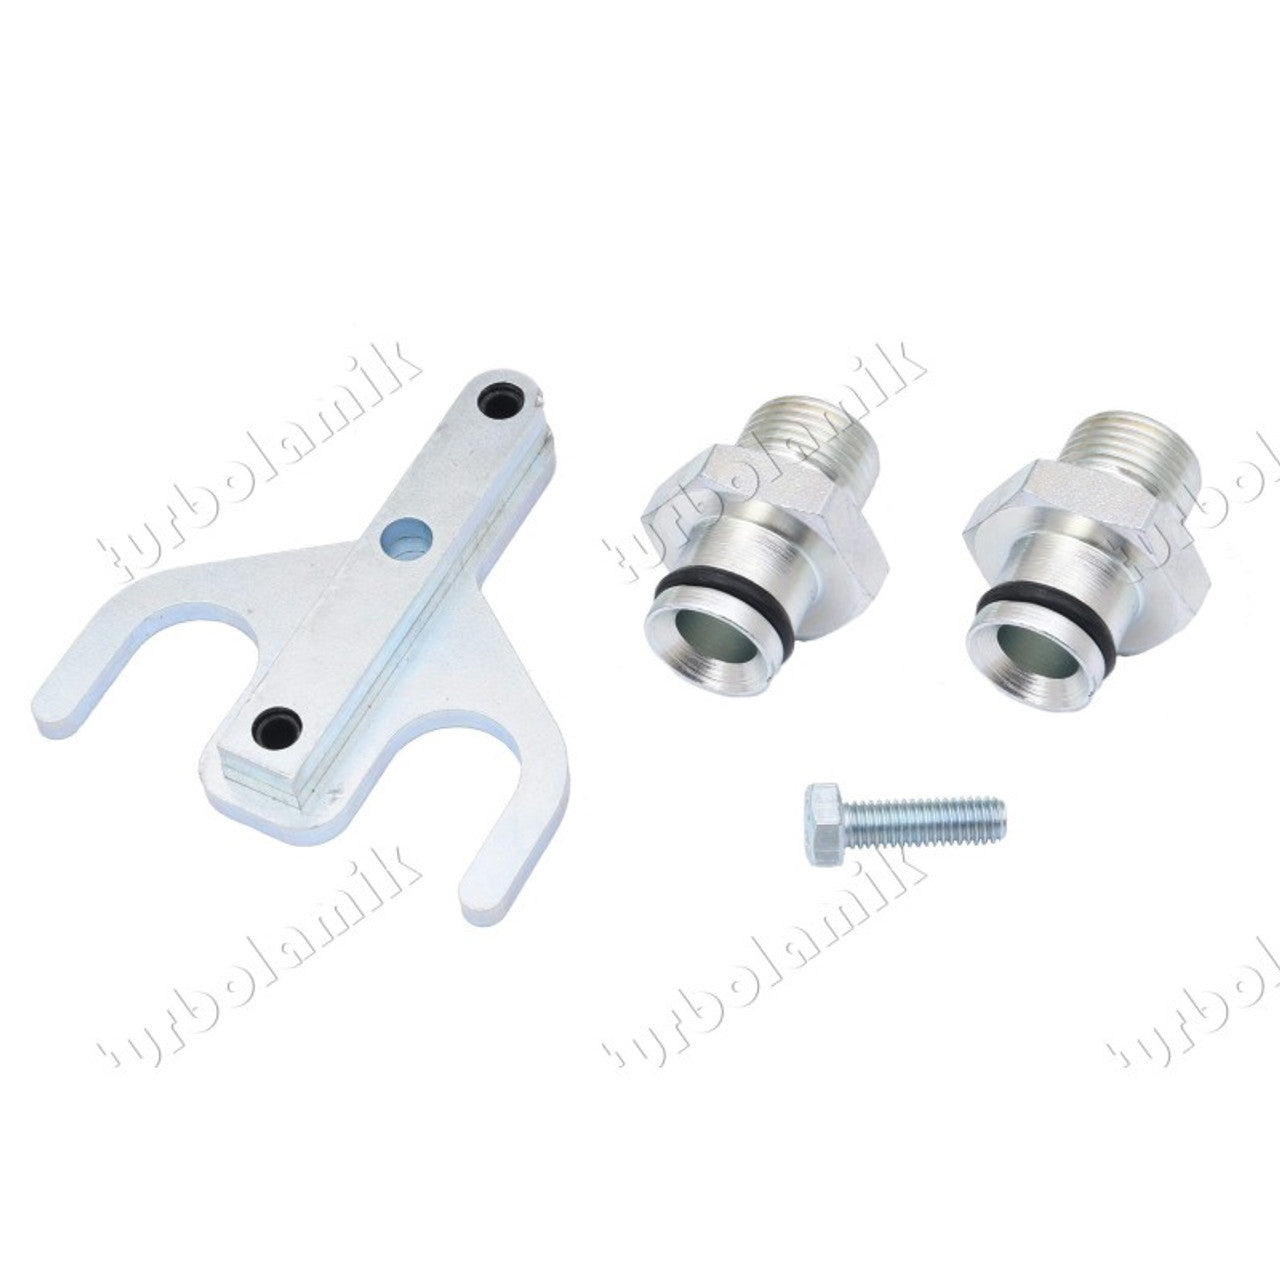 TurboLamik - Transmission Cooler Adapters (BMW Gearboxes)